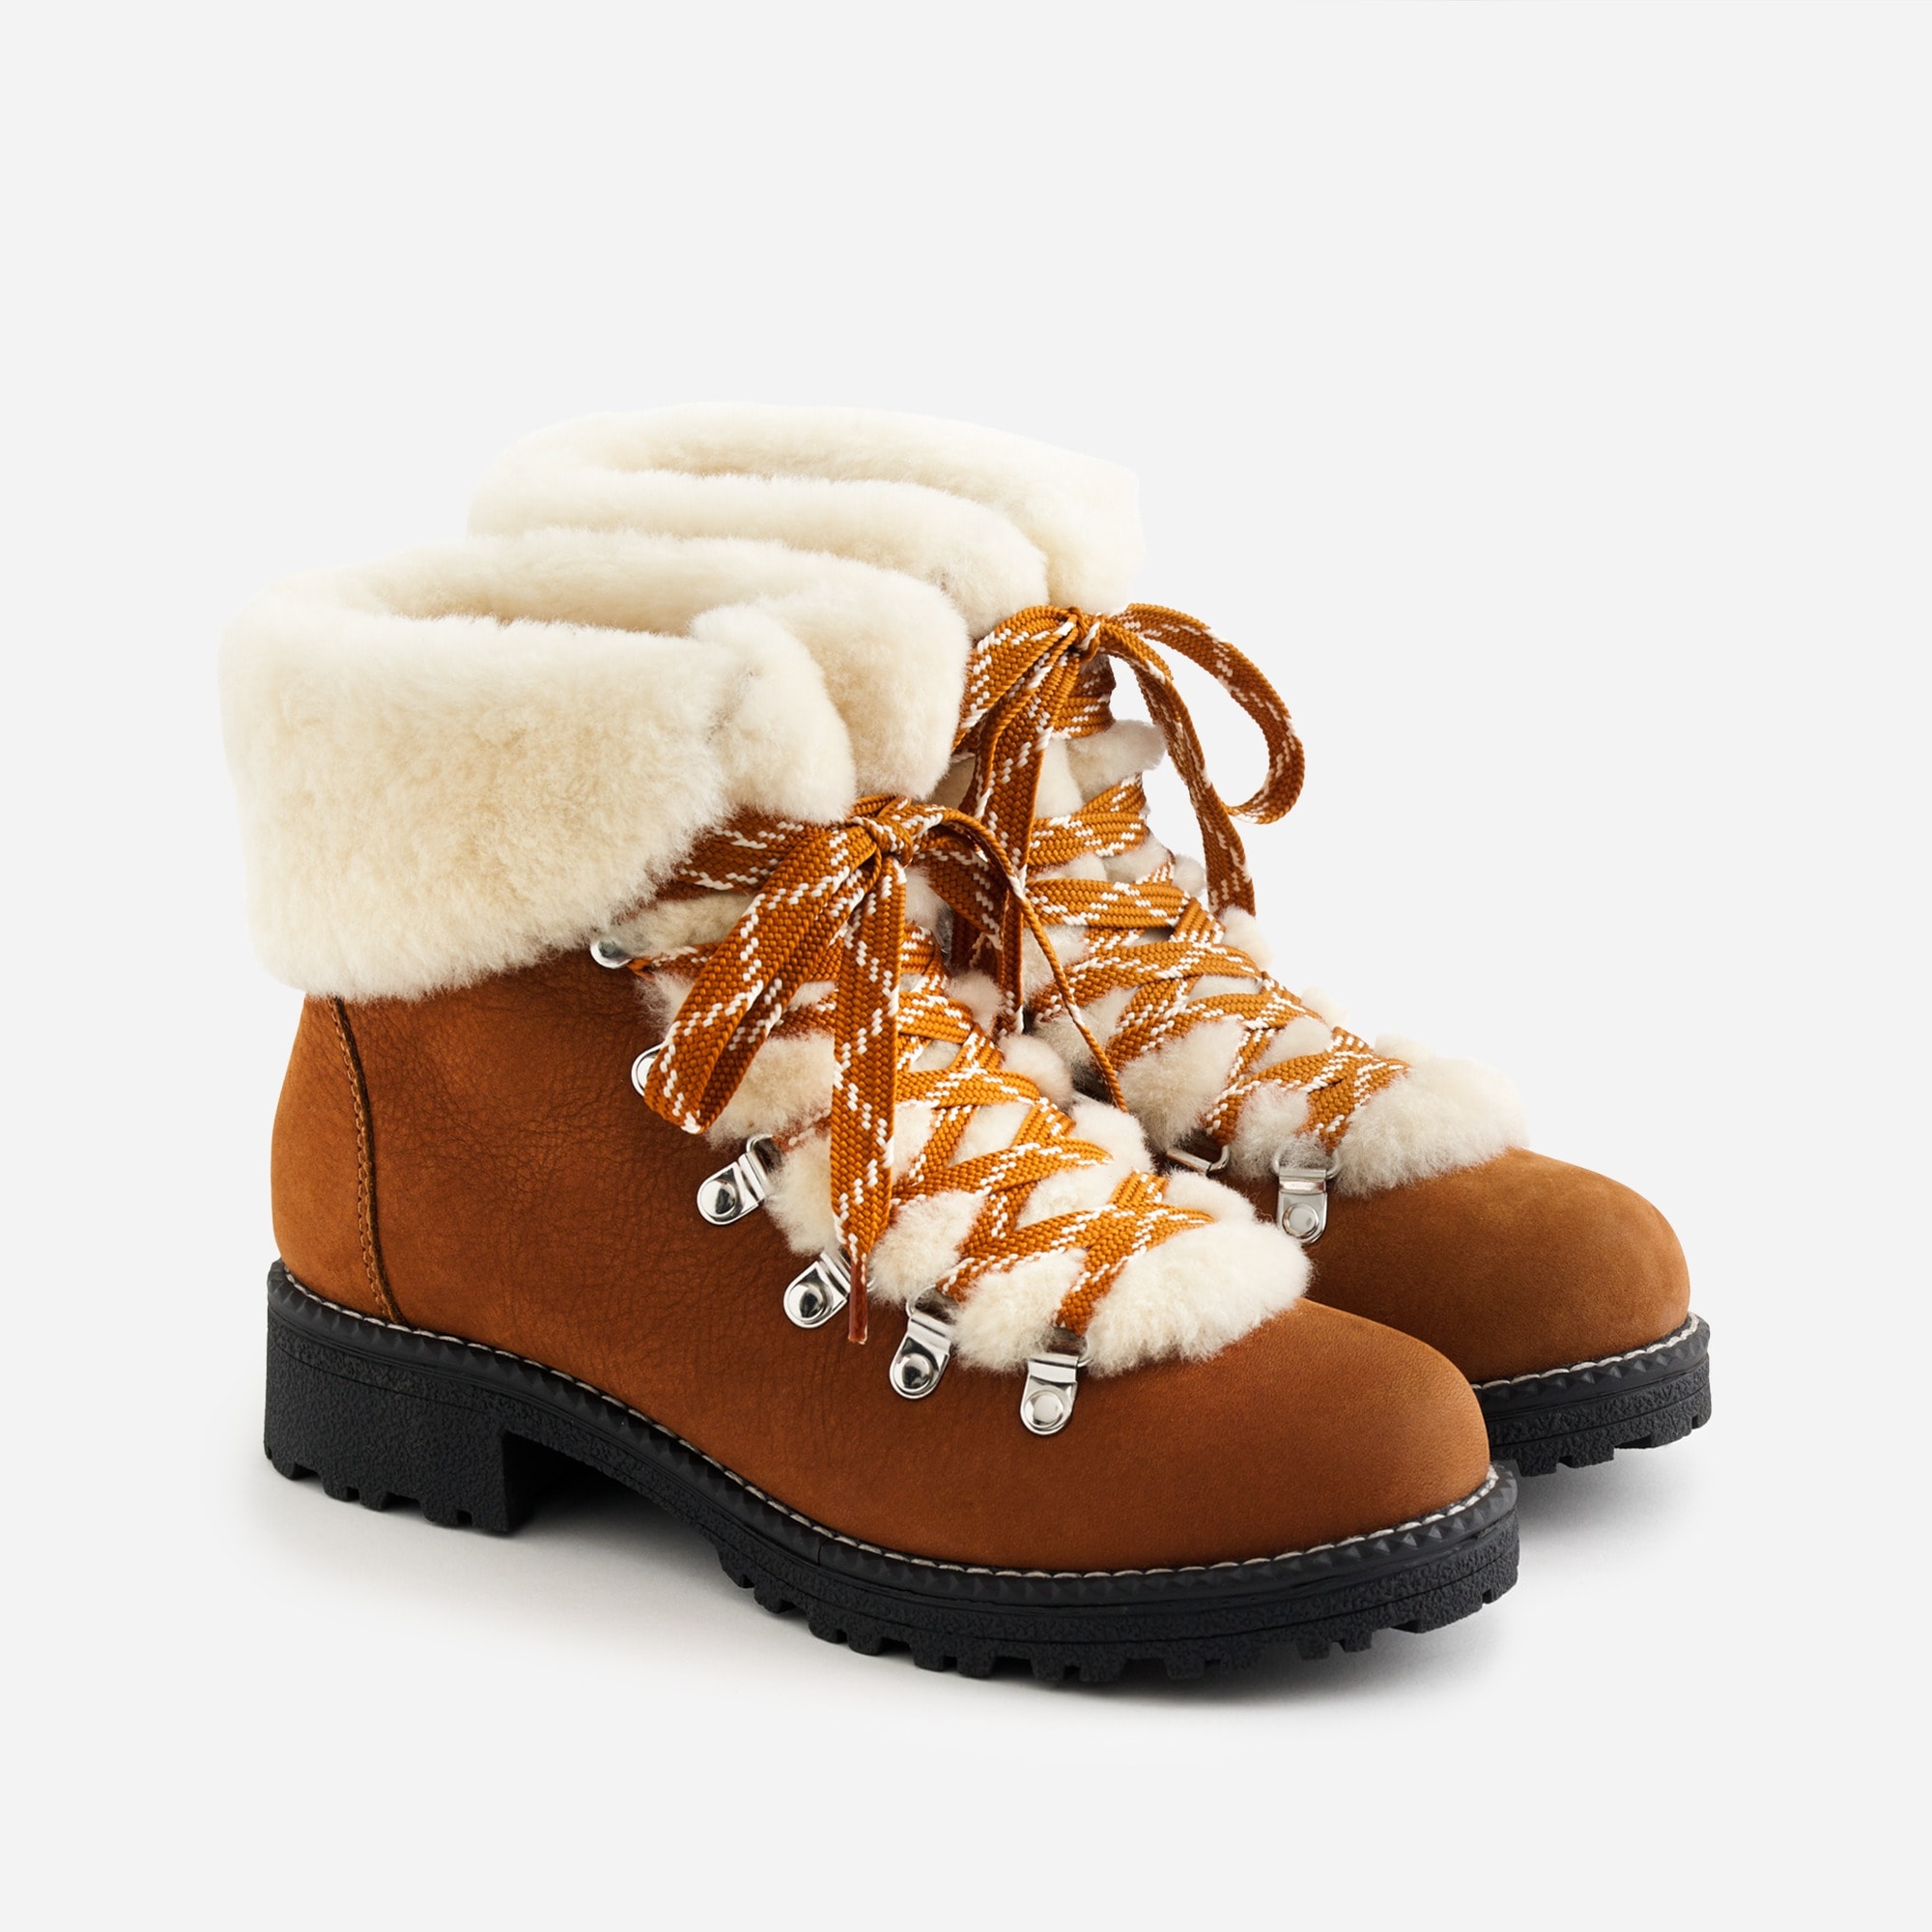 stores that sell snow boots